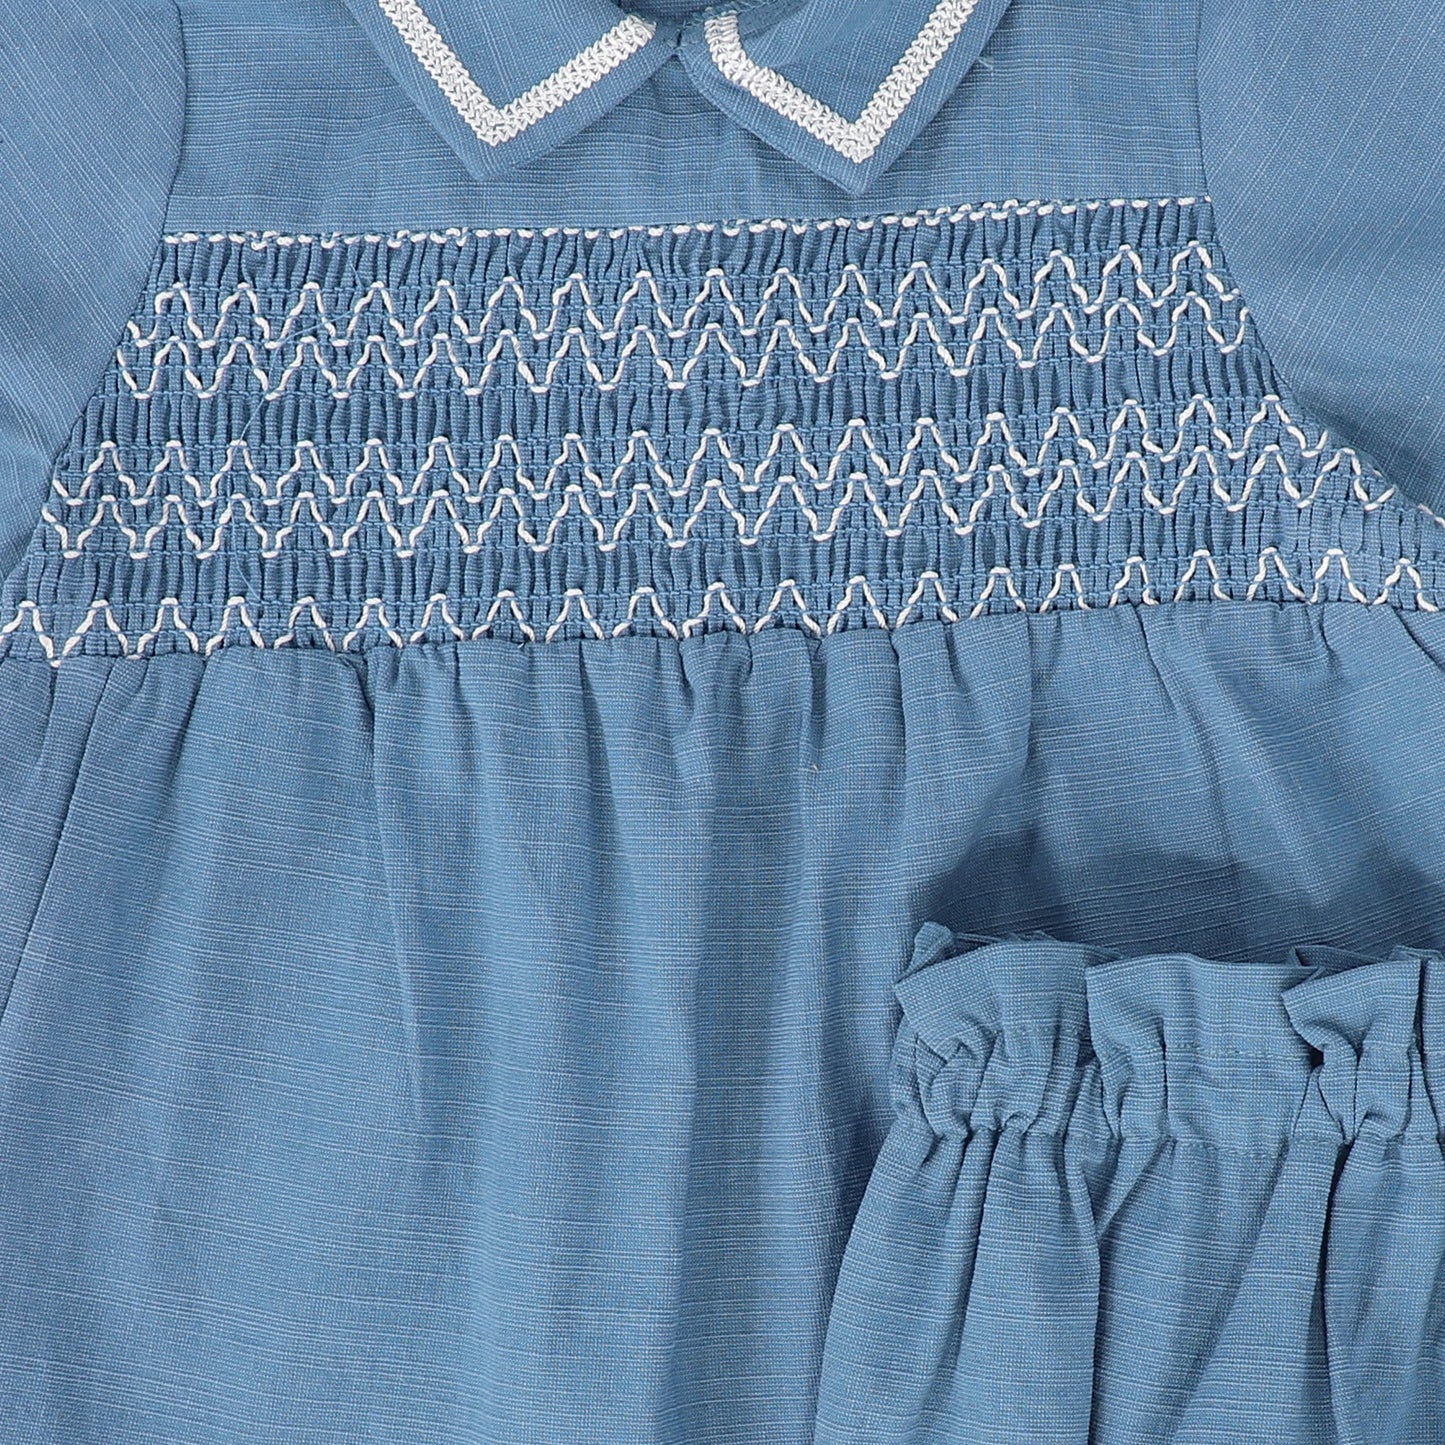 BACE COLLECTION BLUE SMOCKED COLLAR BLOOMER SET